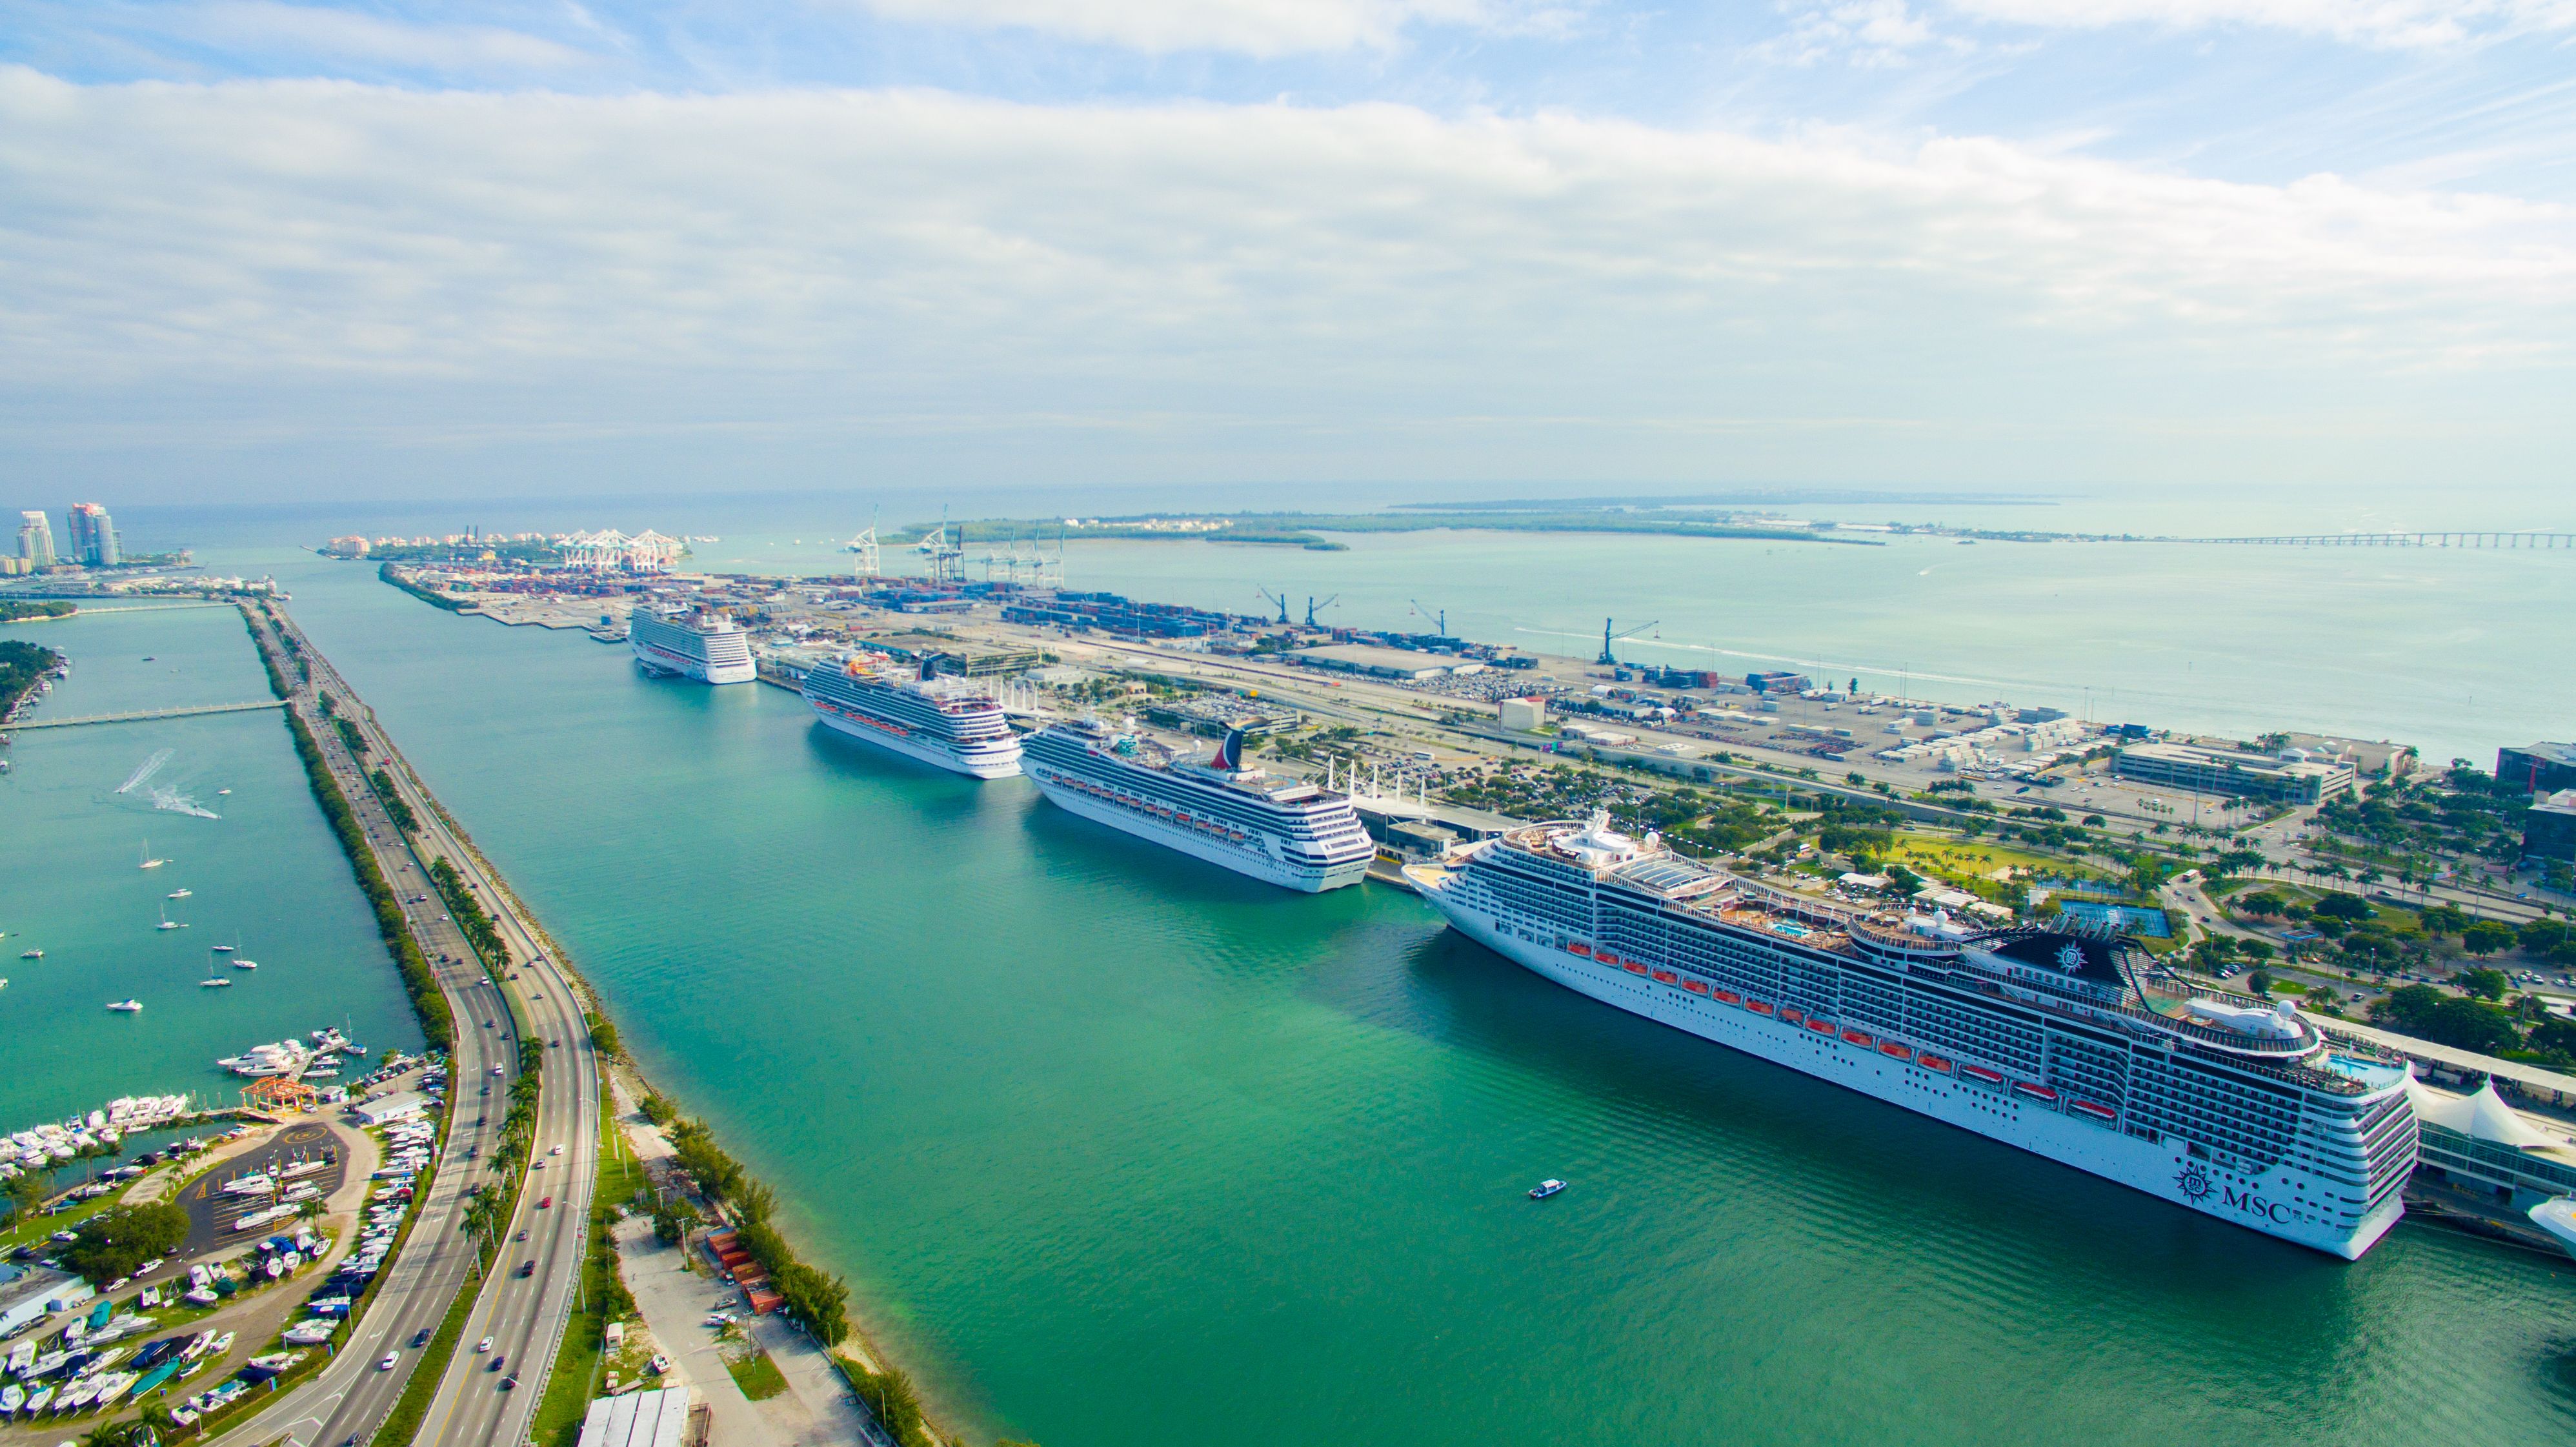 Multiple cruise ships docked at PortMiami, with the city's skyline and busy port facilities in the background, under a partly cloudy sky.